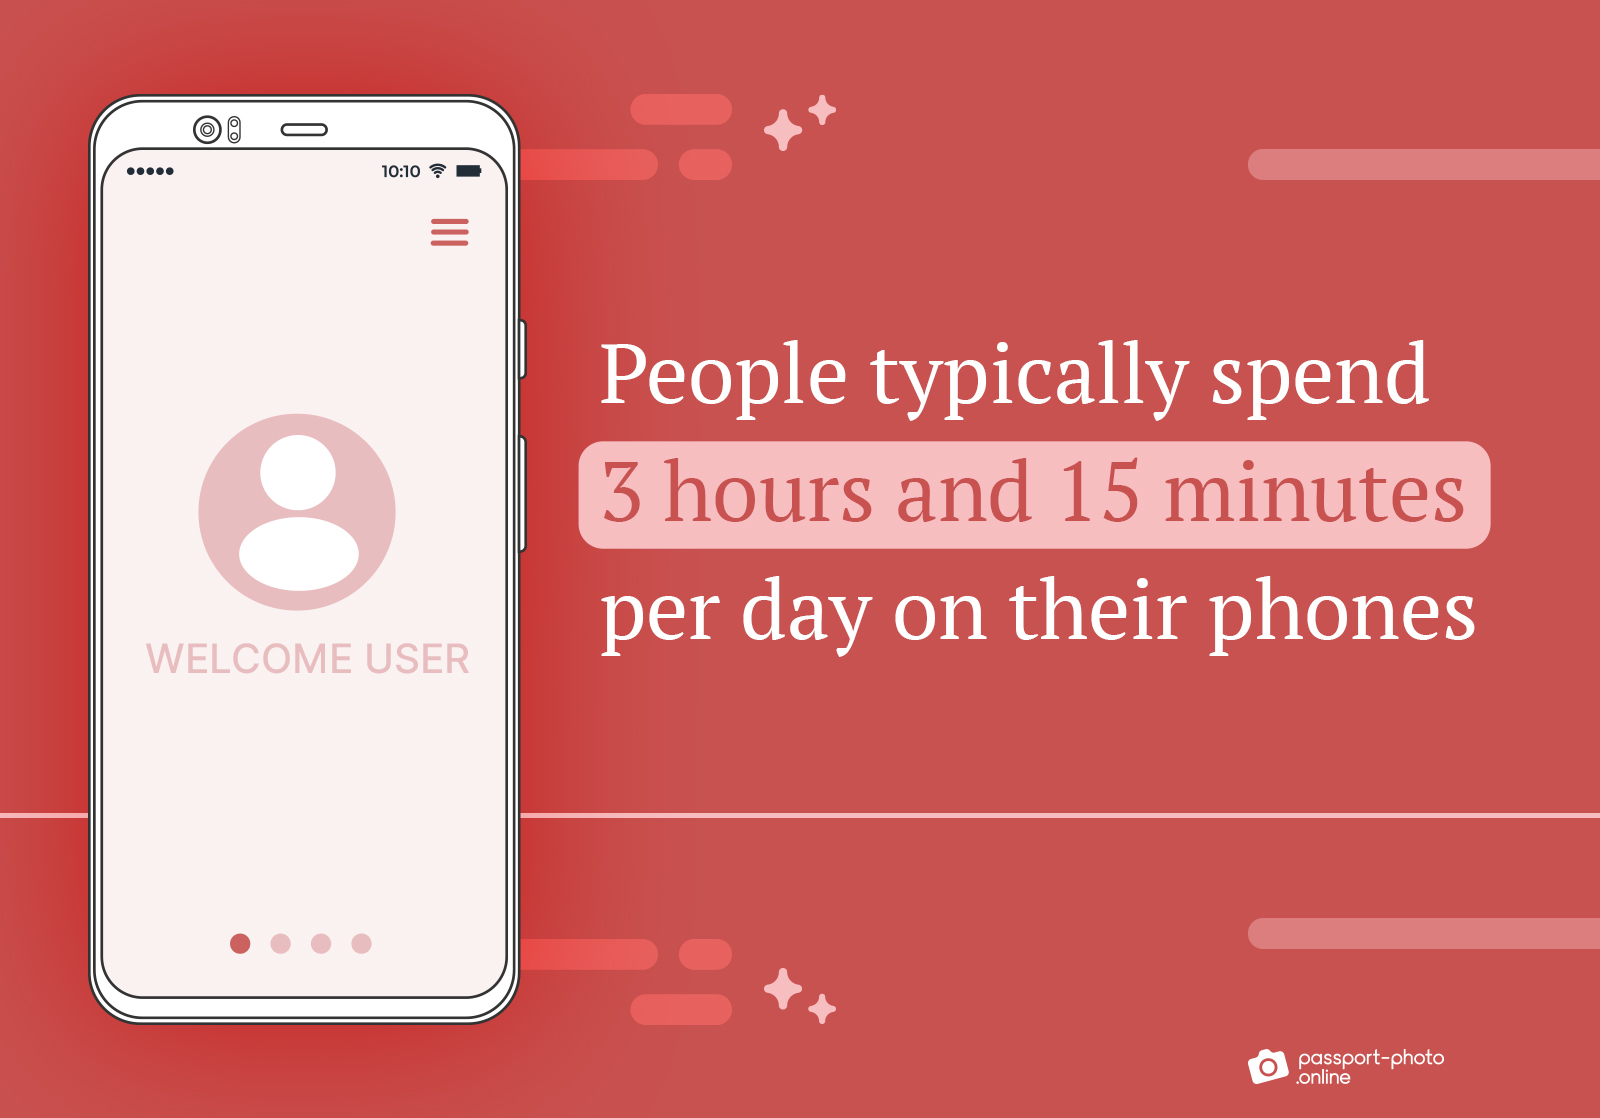 people average 3 hours and 15 minutes daily on their phones